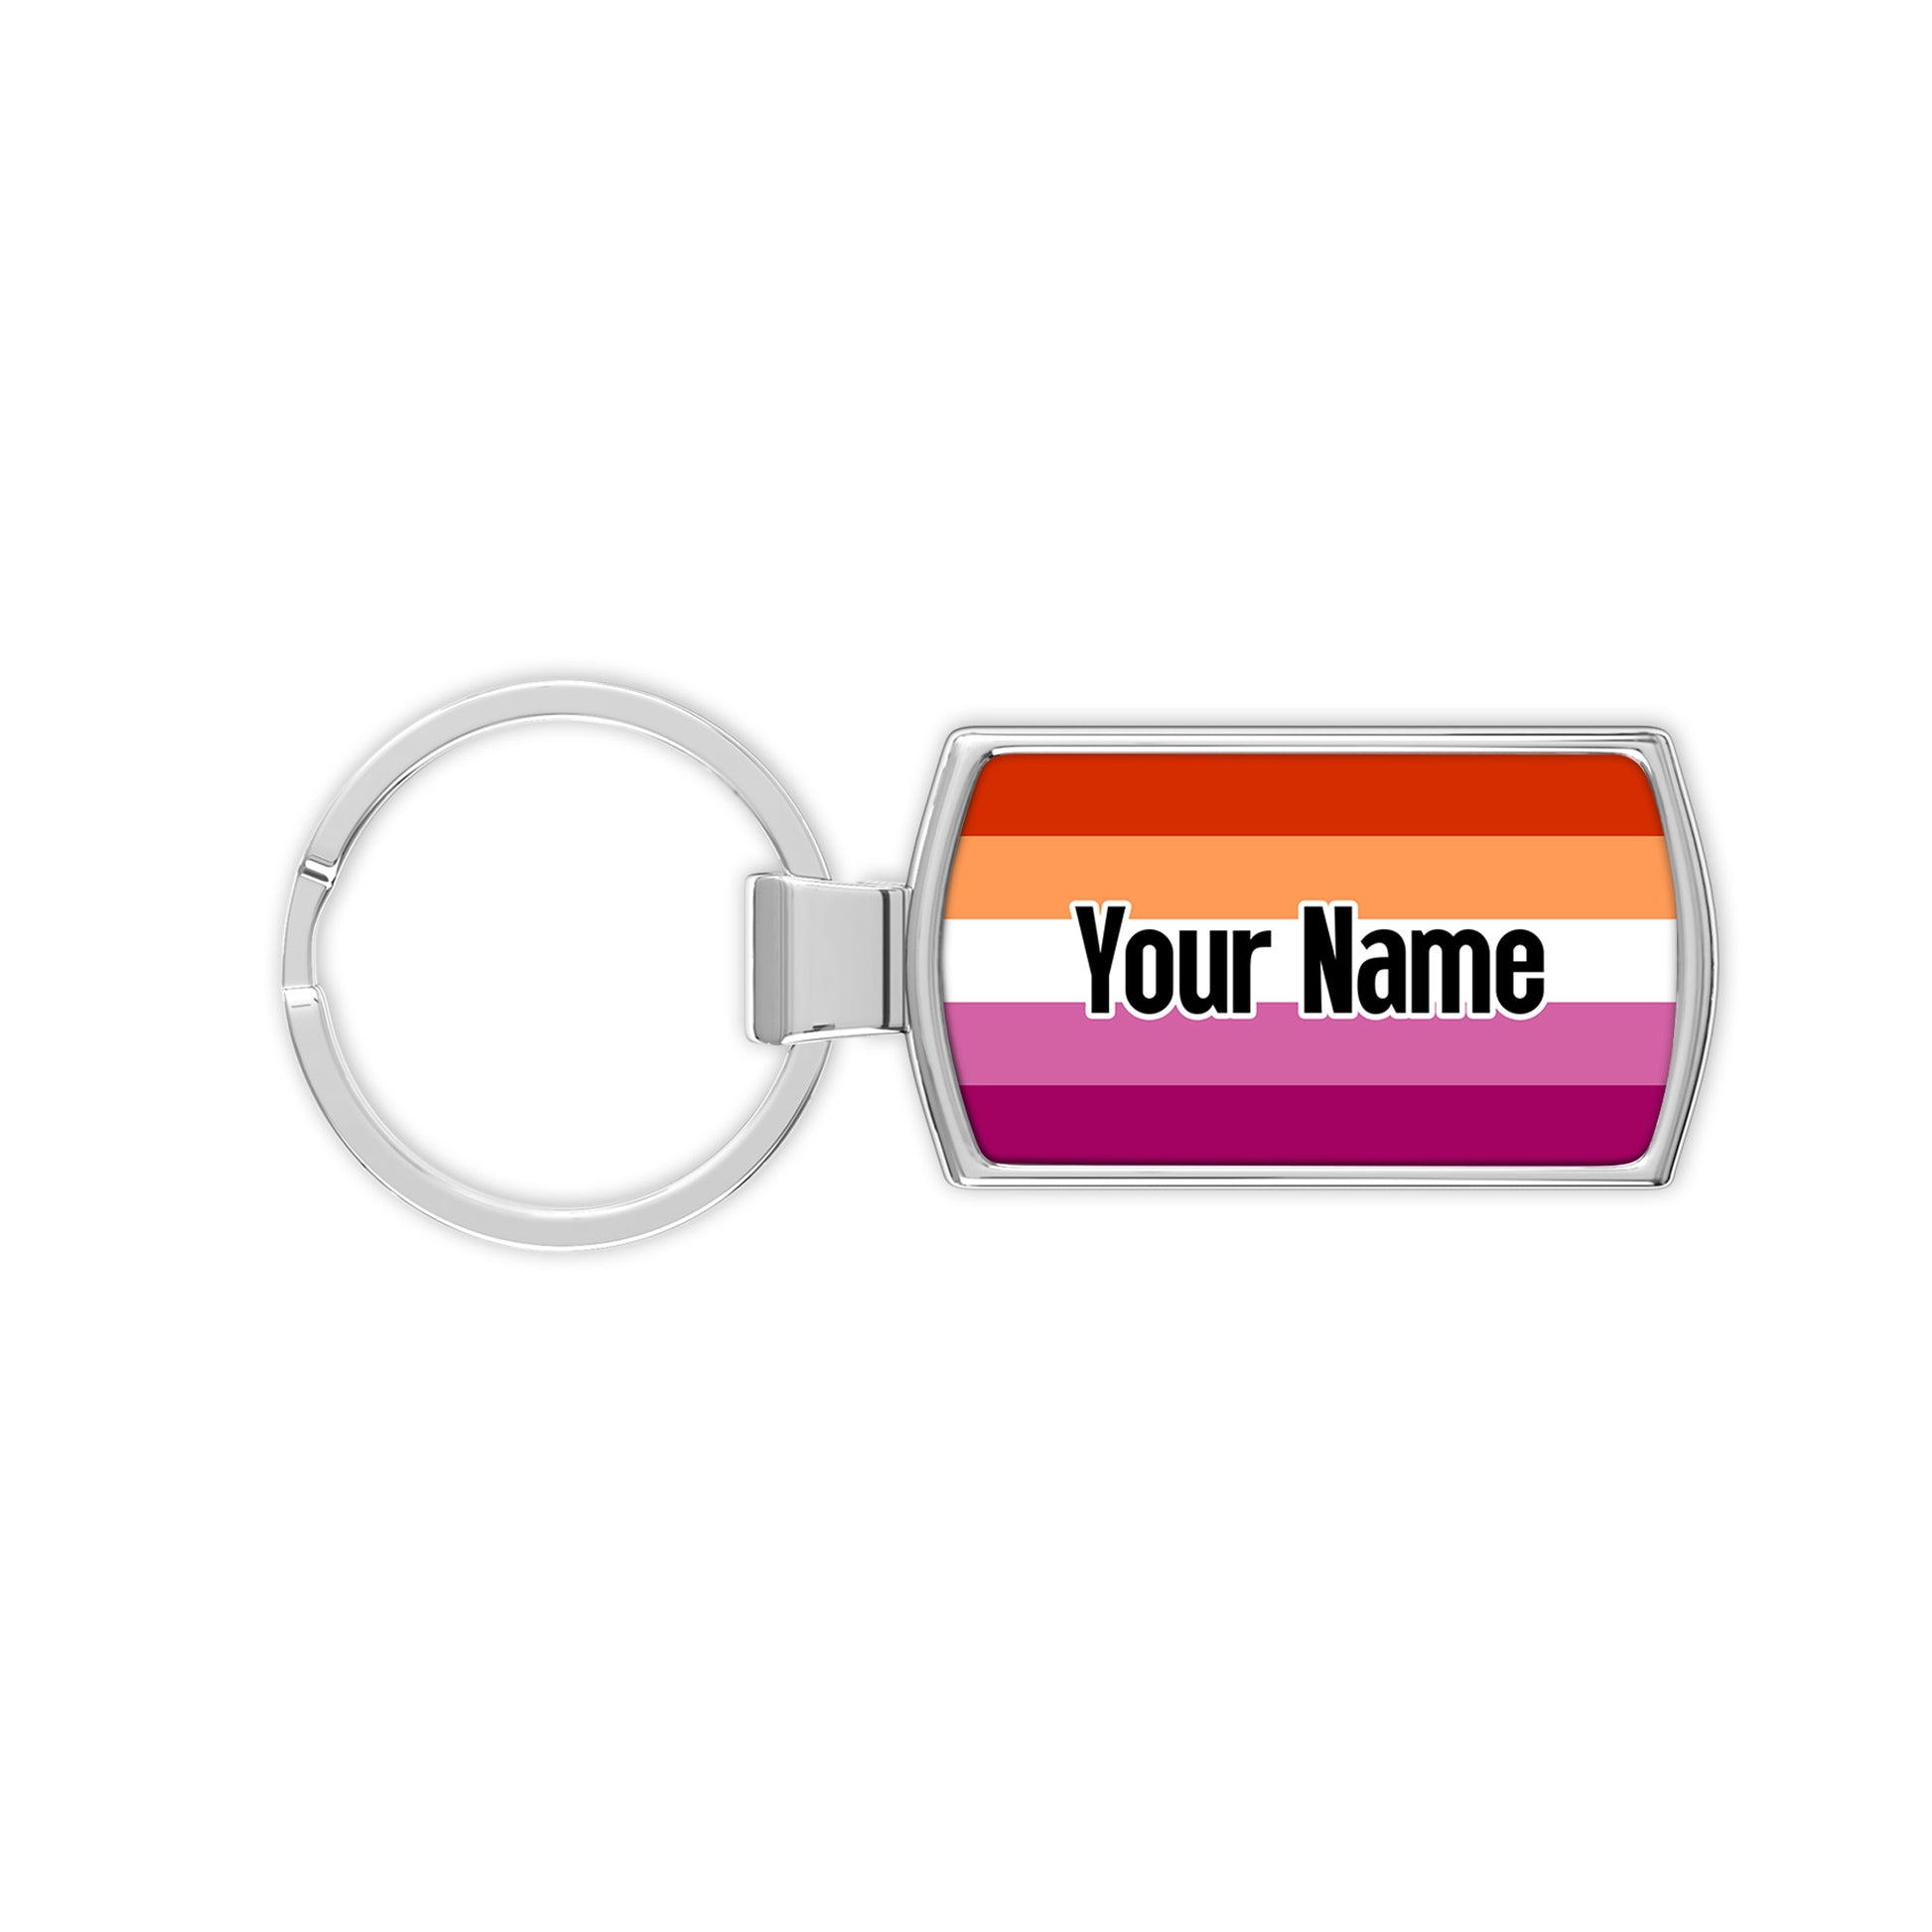 Lesbian pride keyring with lesbian flag and personalised with your name printed over the flag